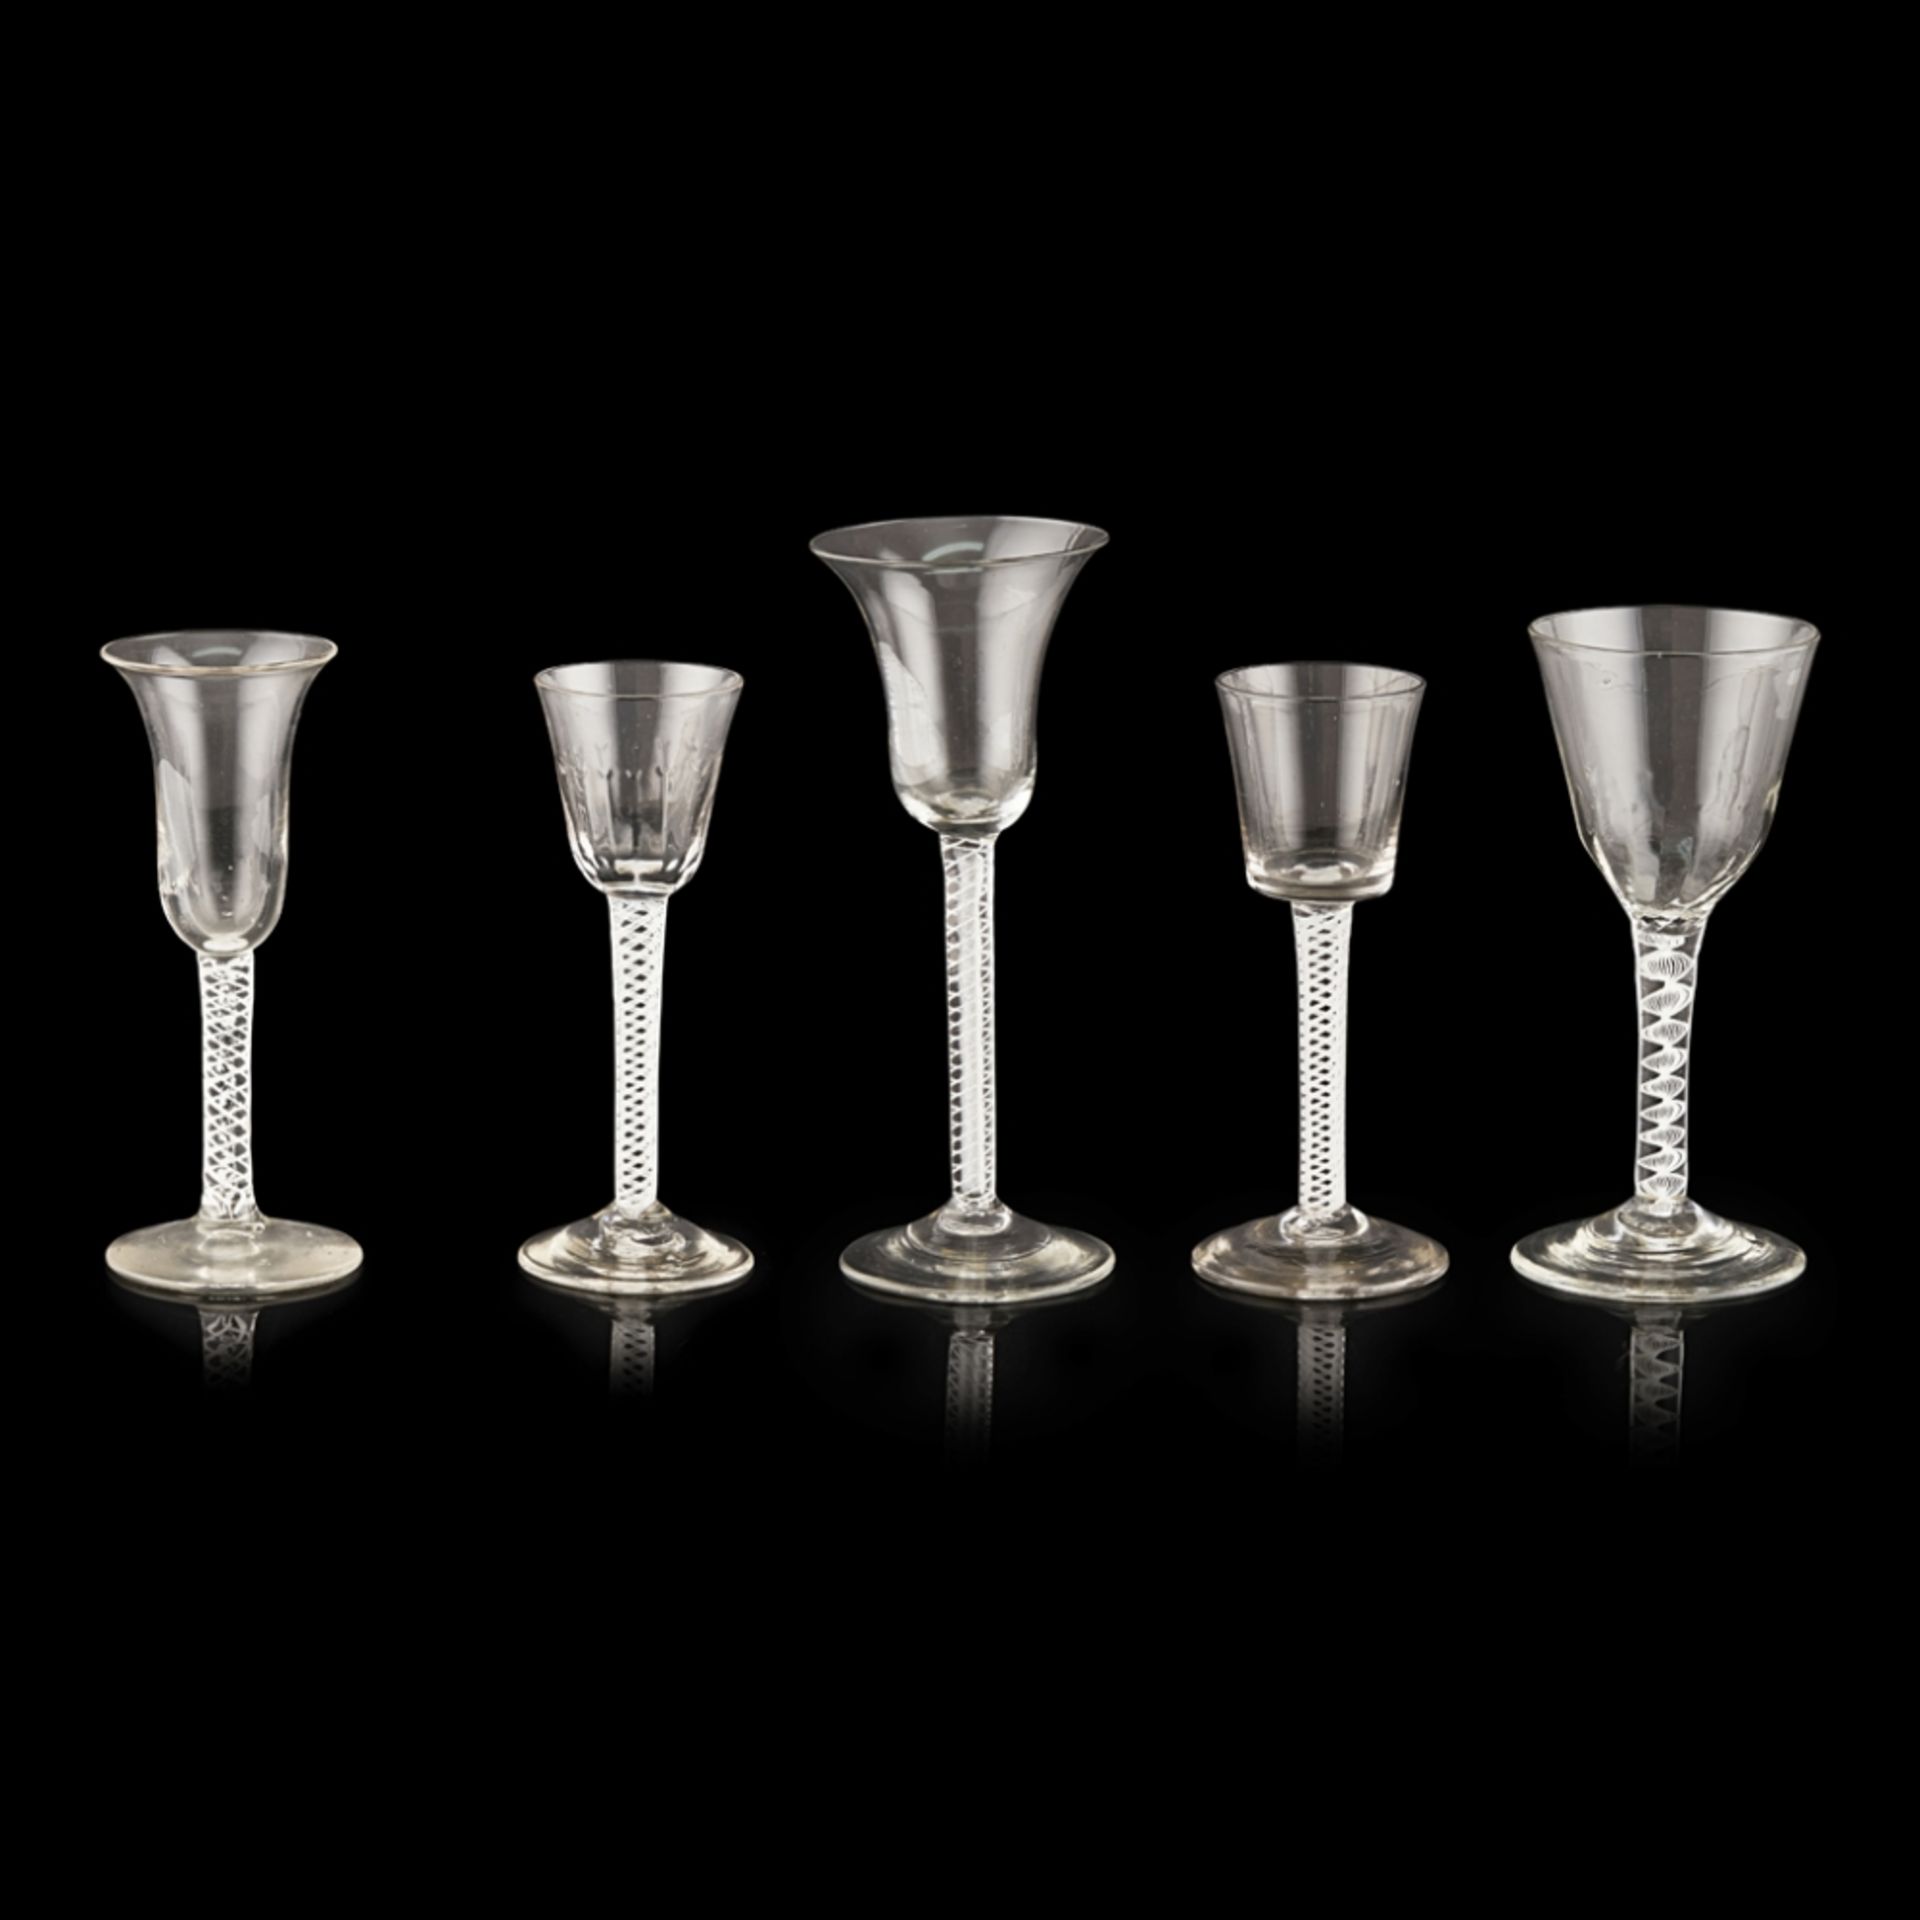 FOUR GEORGIAN TWIST STEM WINE GLASSESMID-18TH CENTURY comprising a bell bowled glass with a mixed